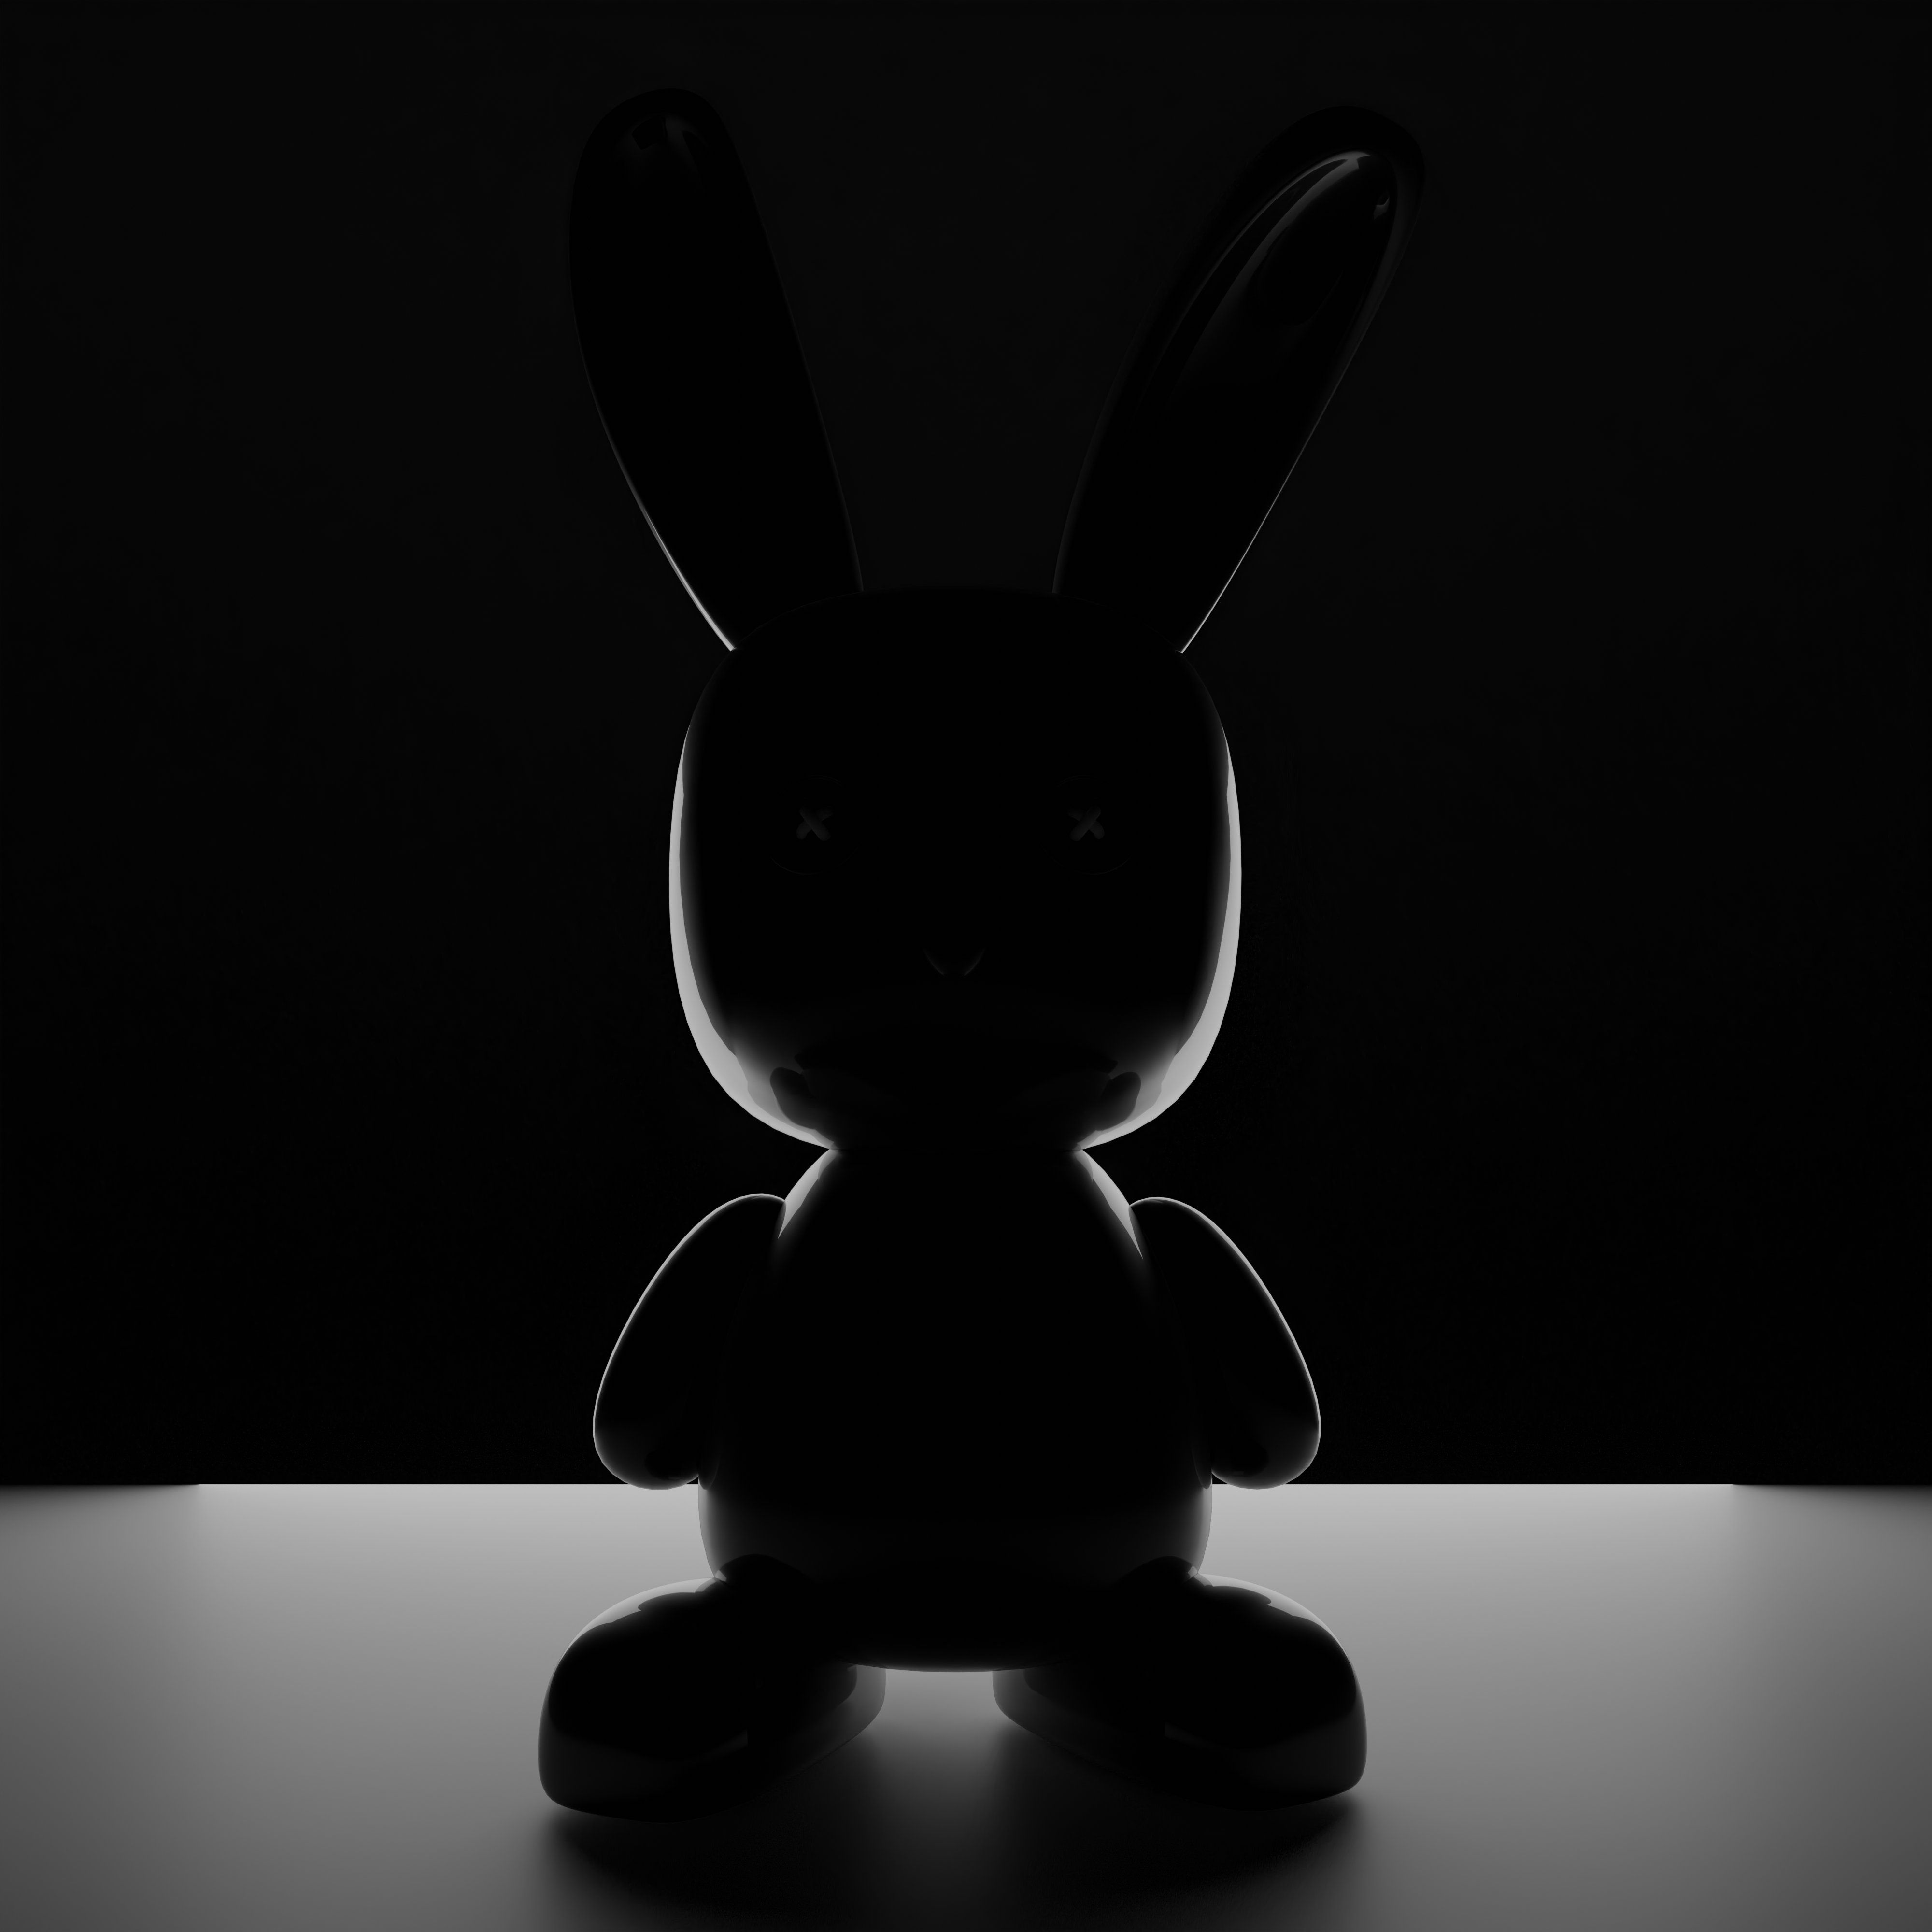 Psycho Bunny Wallpapers - Top Free Psycho Bunny Backgrounds ...